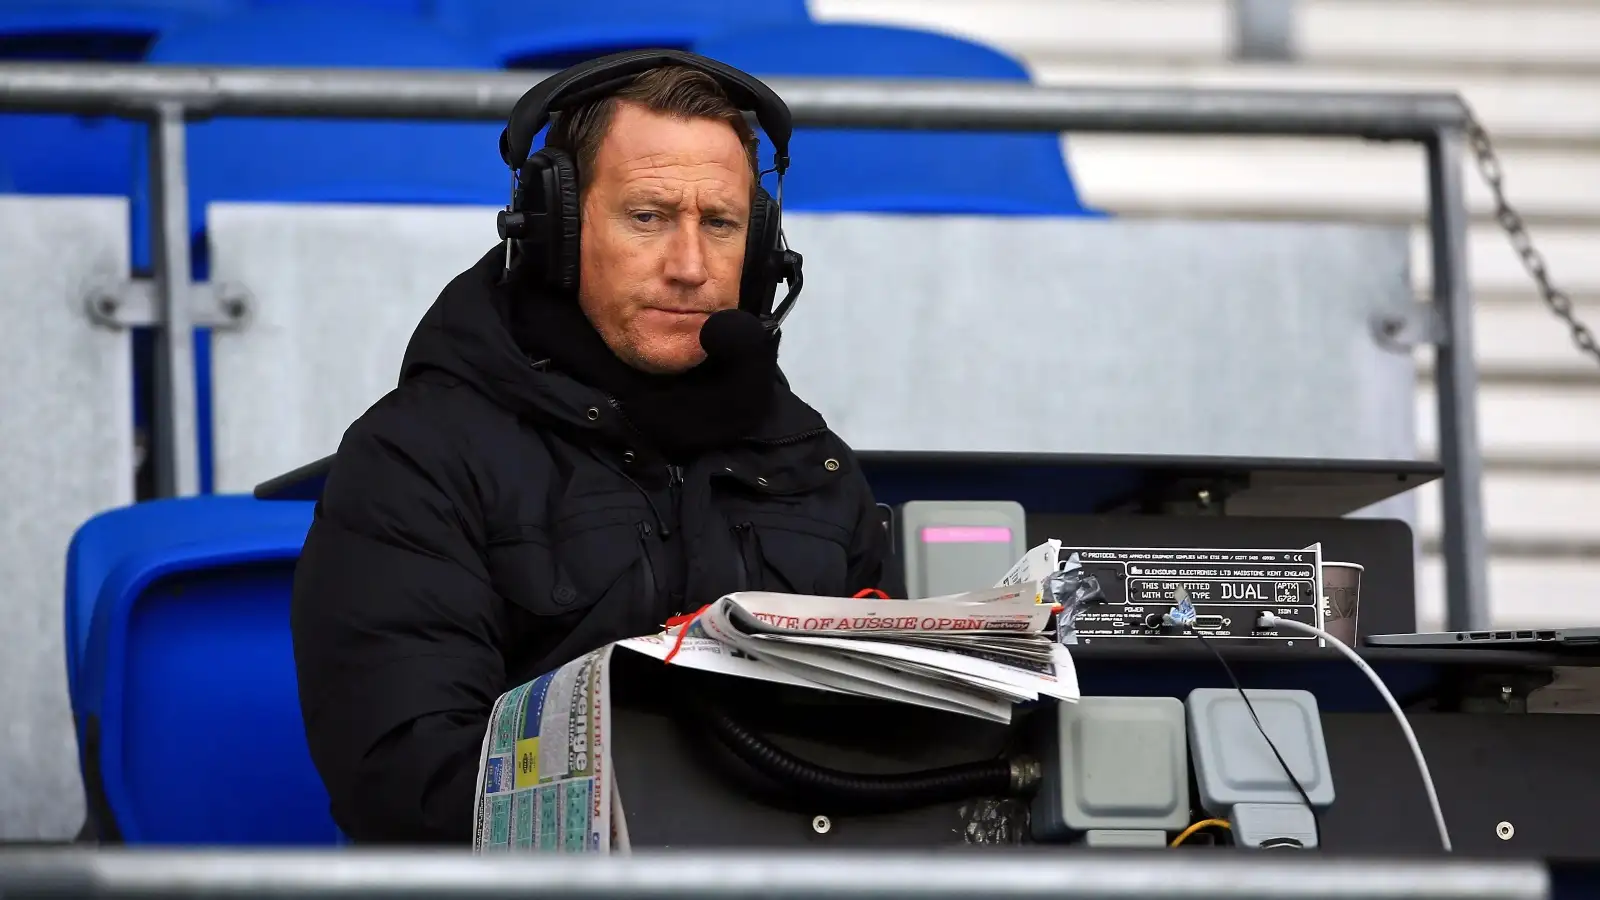 Ray Parlour on commentary duty